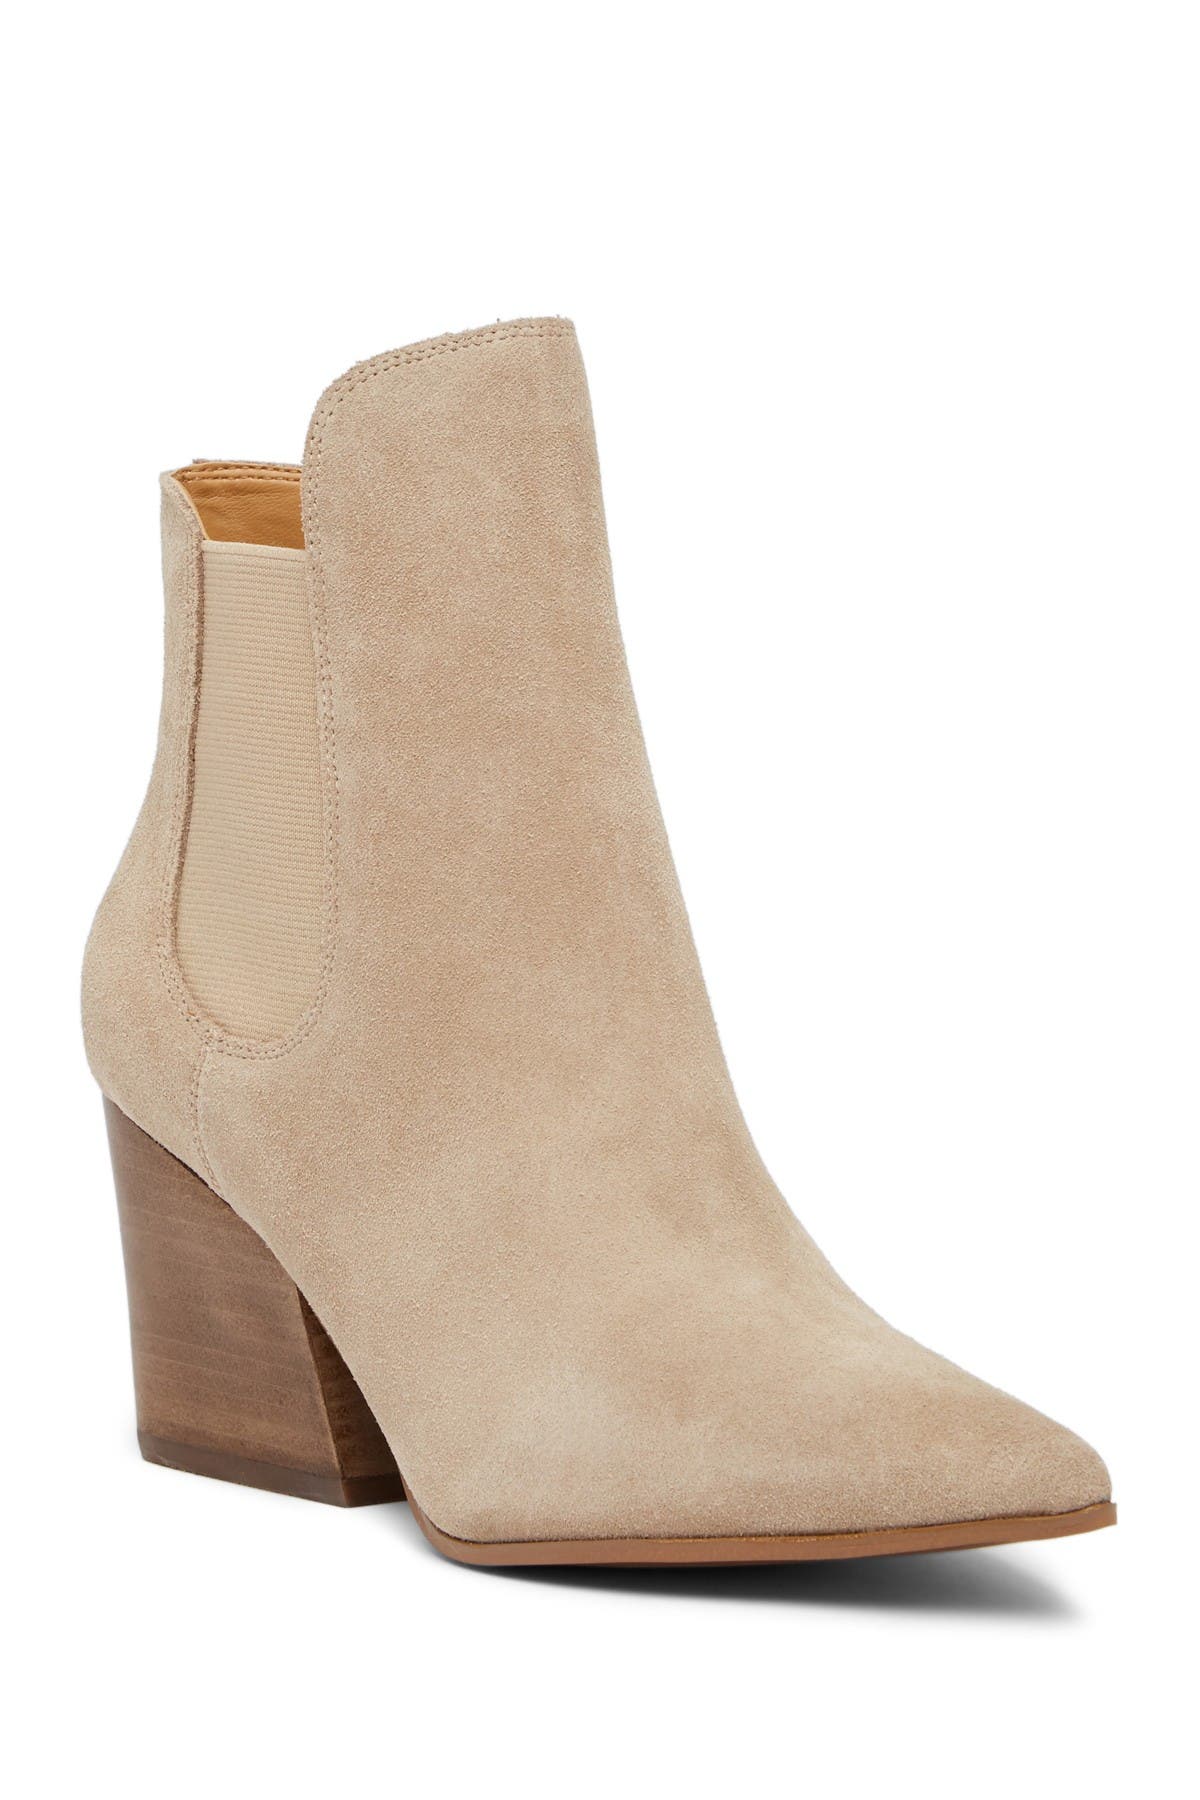 kendall & kylie finley suede boot